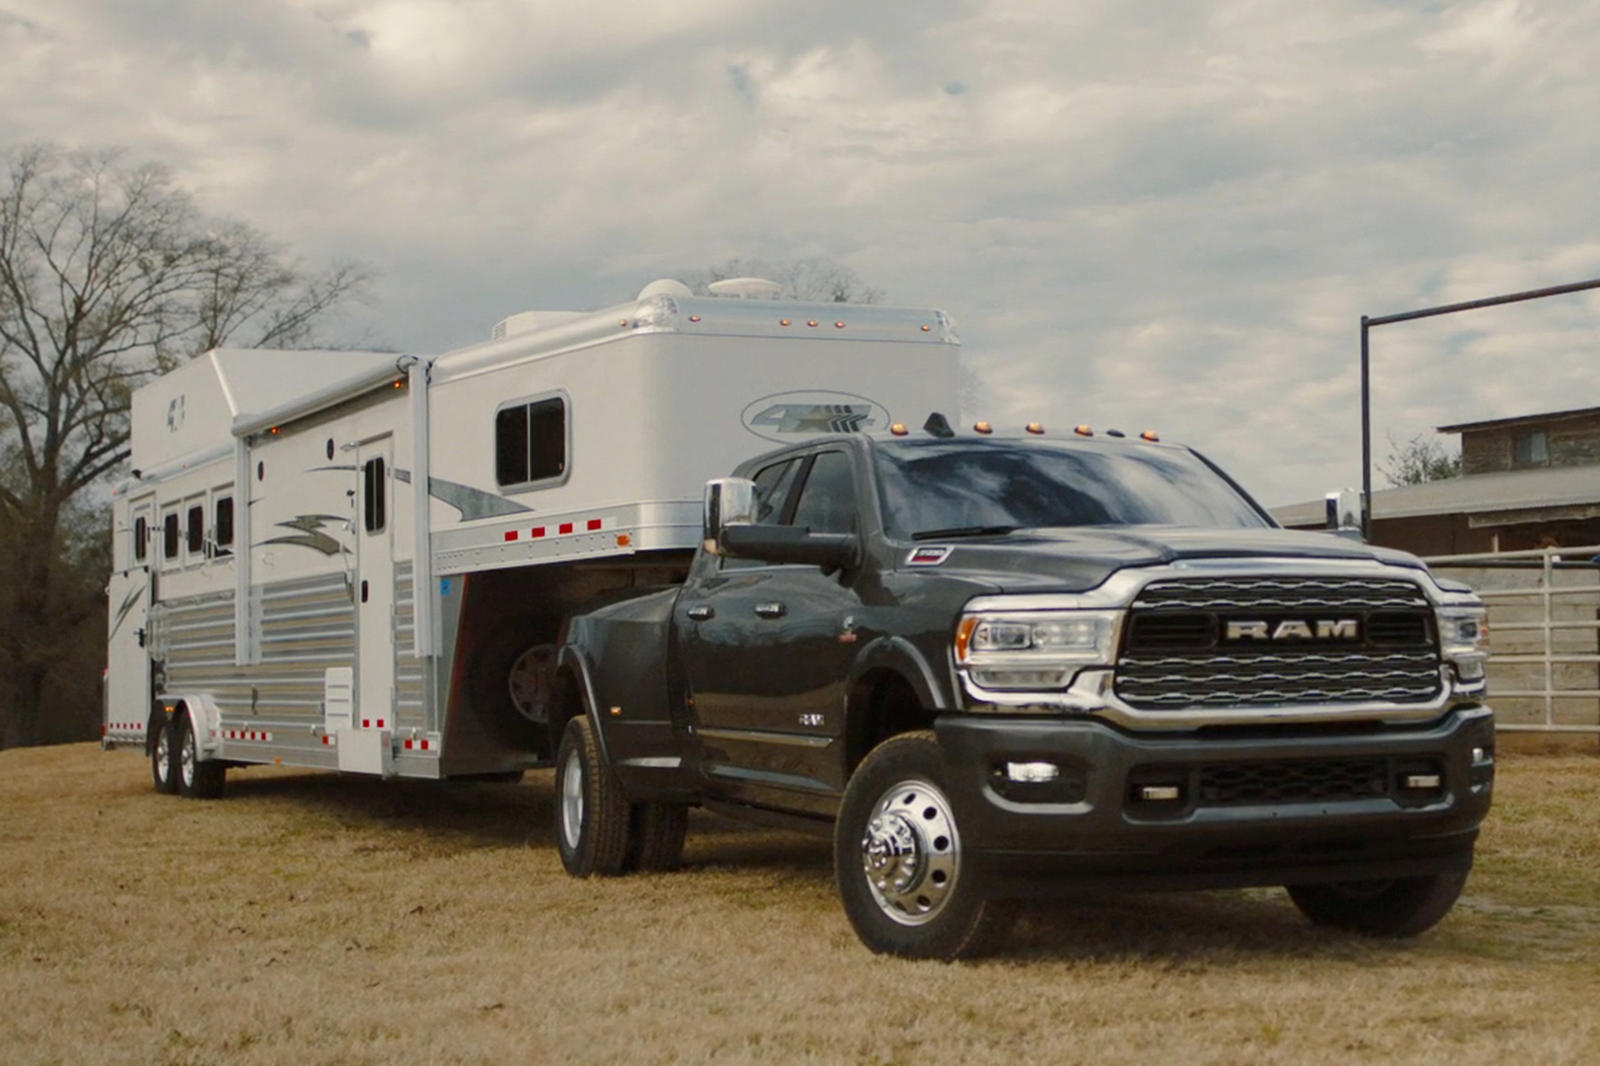 Dodge, Jeep And Ram Super Bowl Commercials Aim For Americana CarBuzz